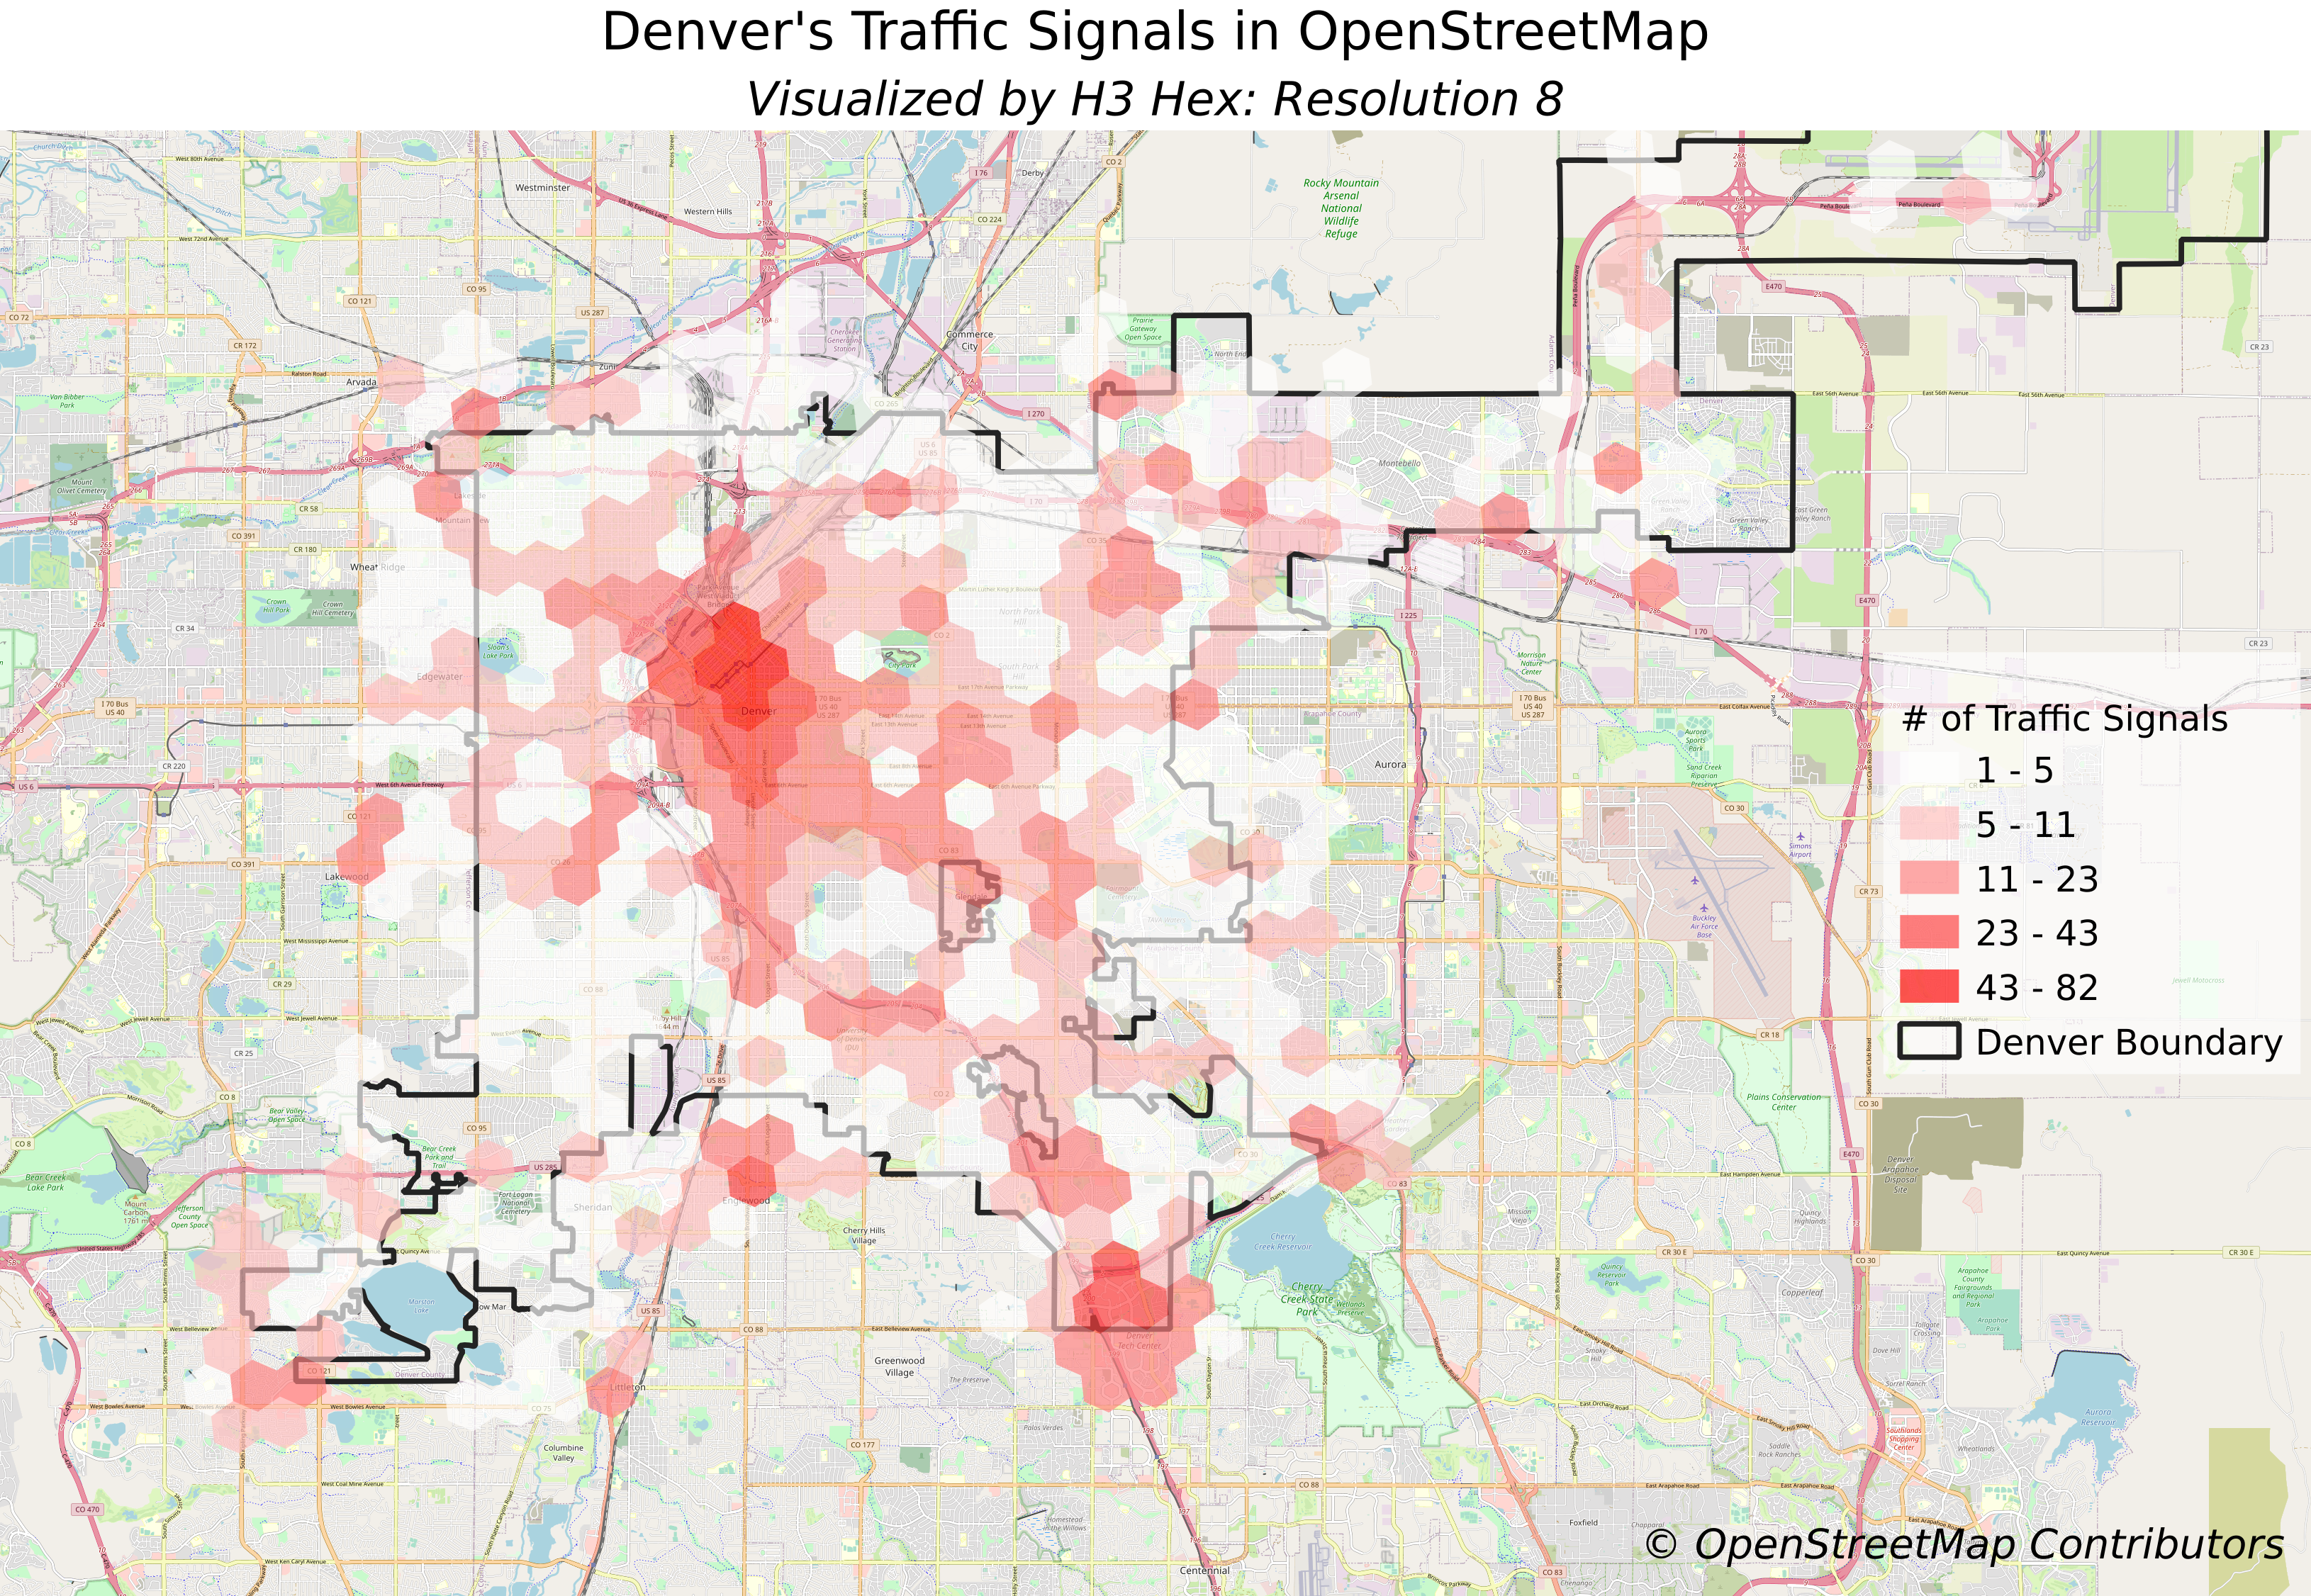 Image from QGIS visualizing the traffic signal count by H3 hex for resolution 8.